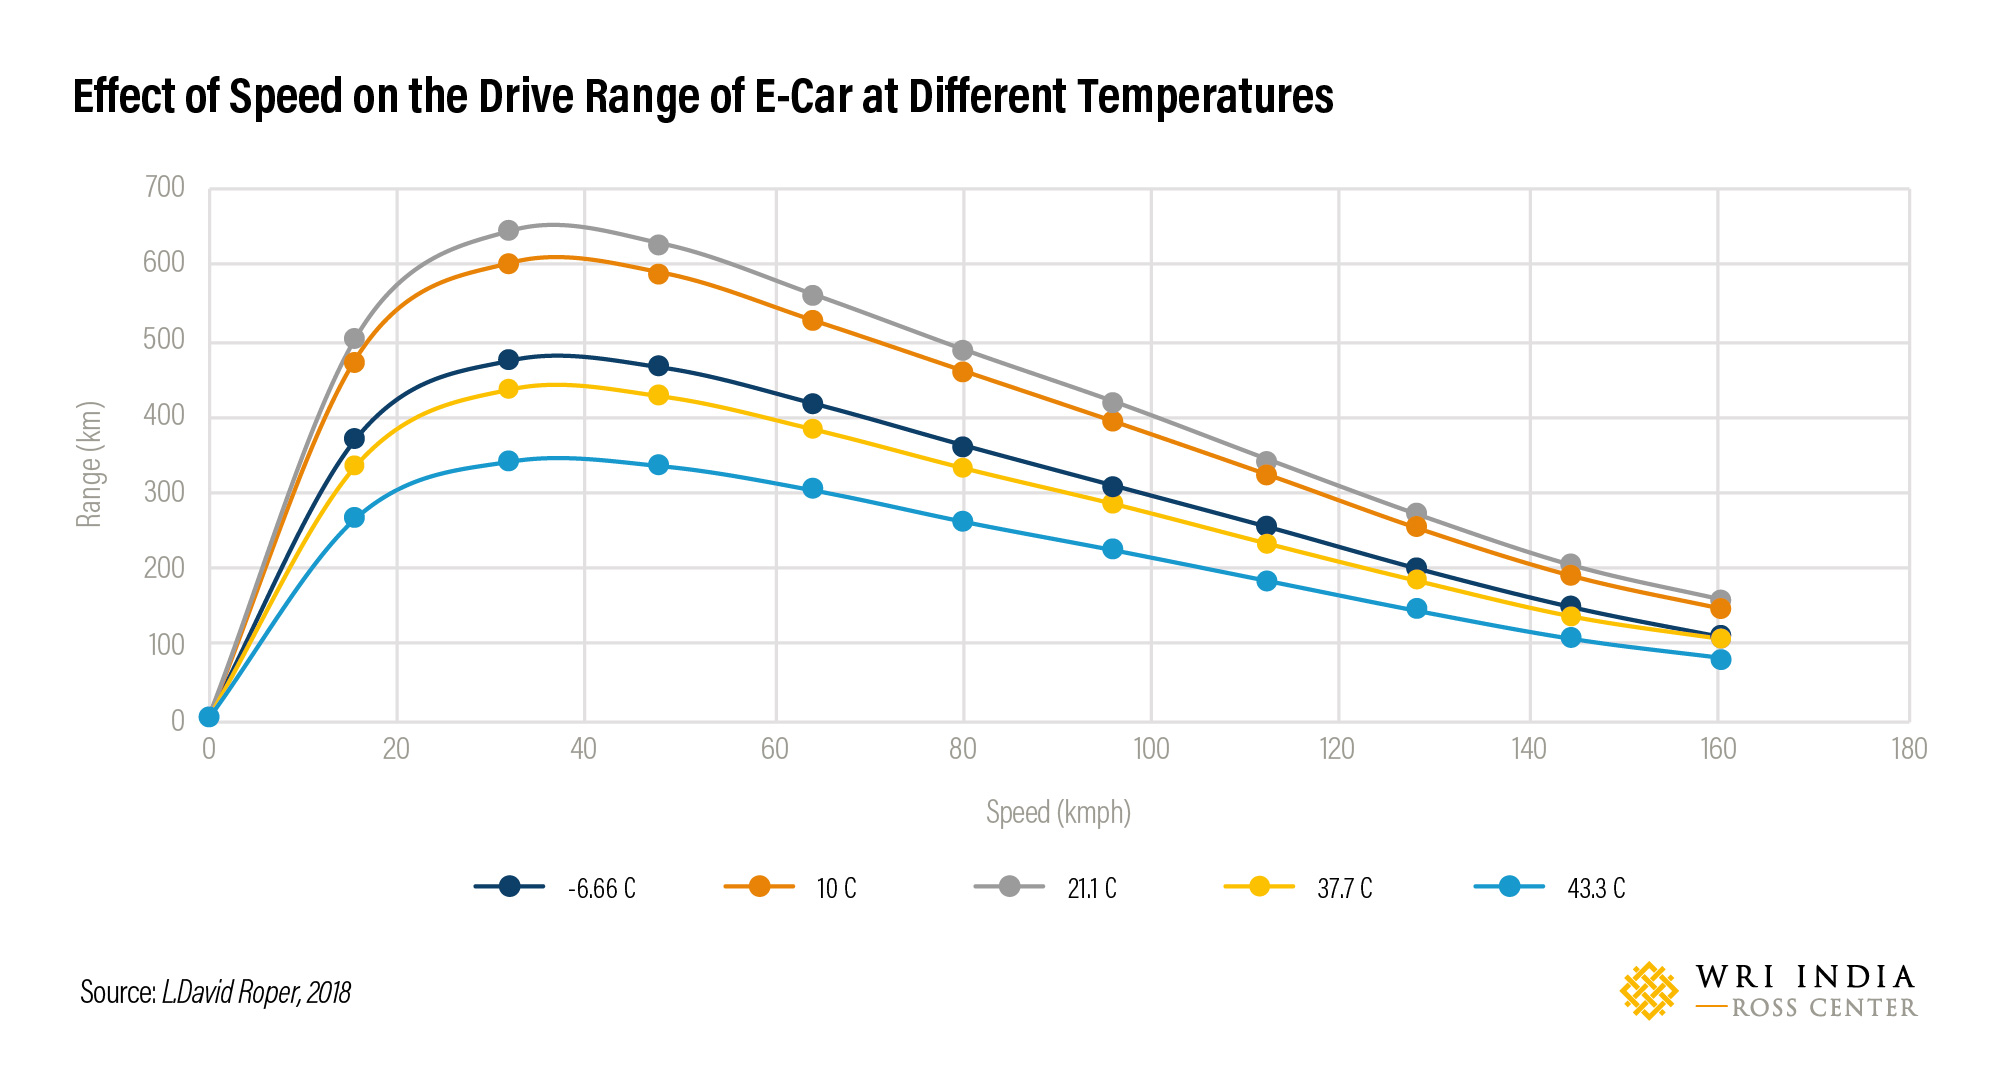 Figure 3: Effect of speed on the drive range of e-car at different temperatures. (Data Source: L. David Roper, 2018)